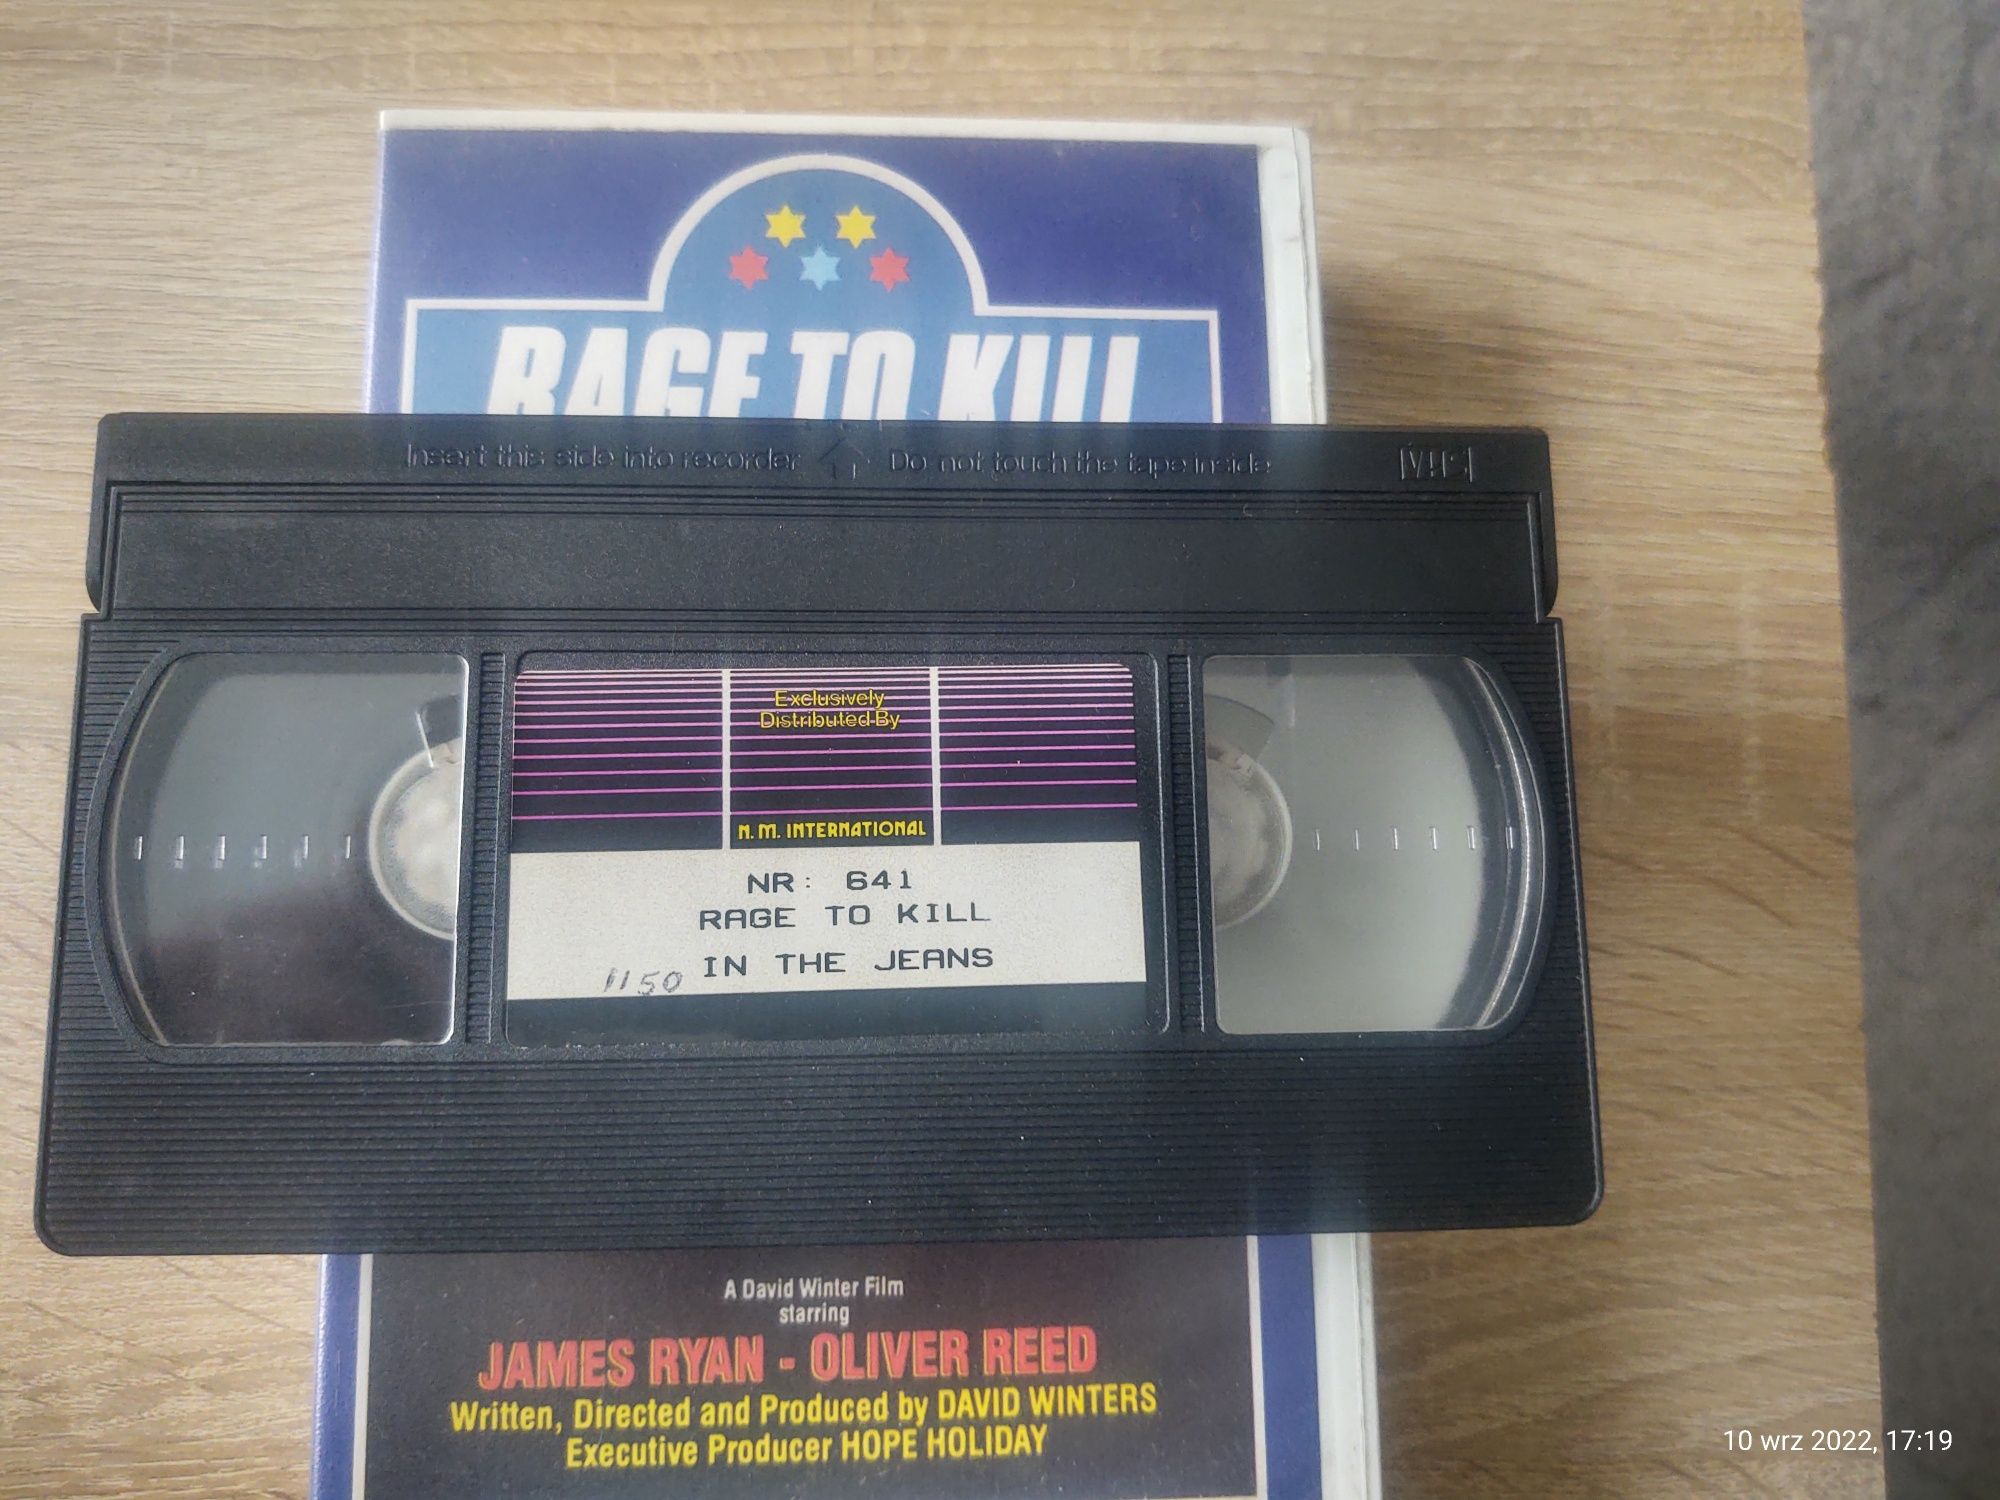 Rage to kill - In the jeans - kaseta vhs 2 filmy